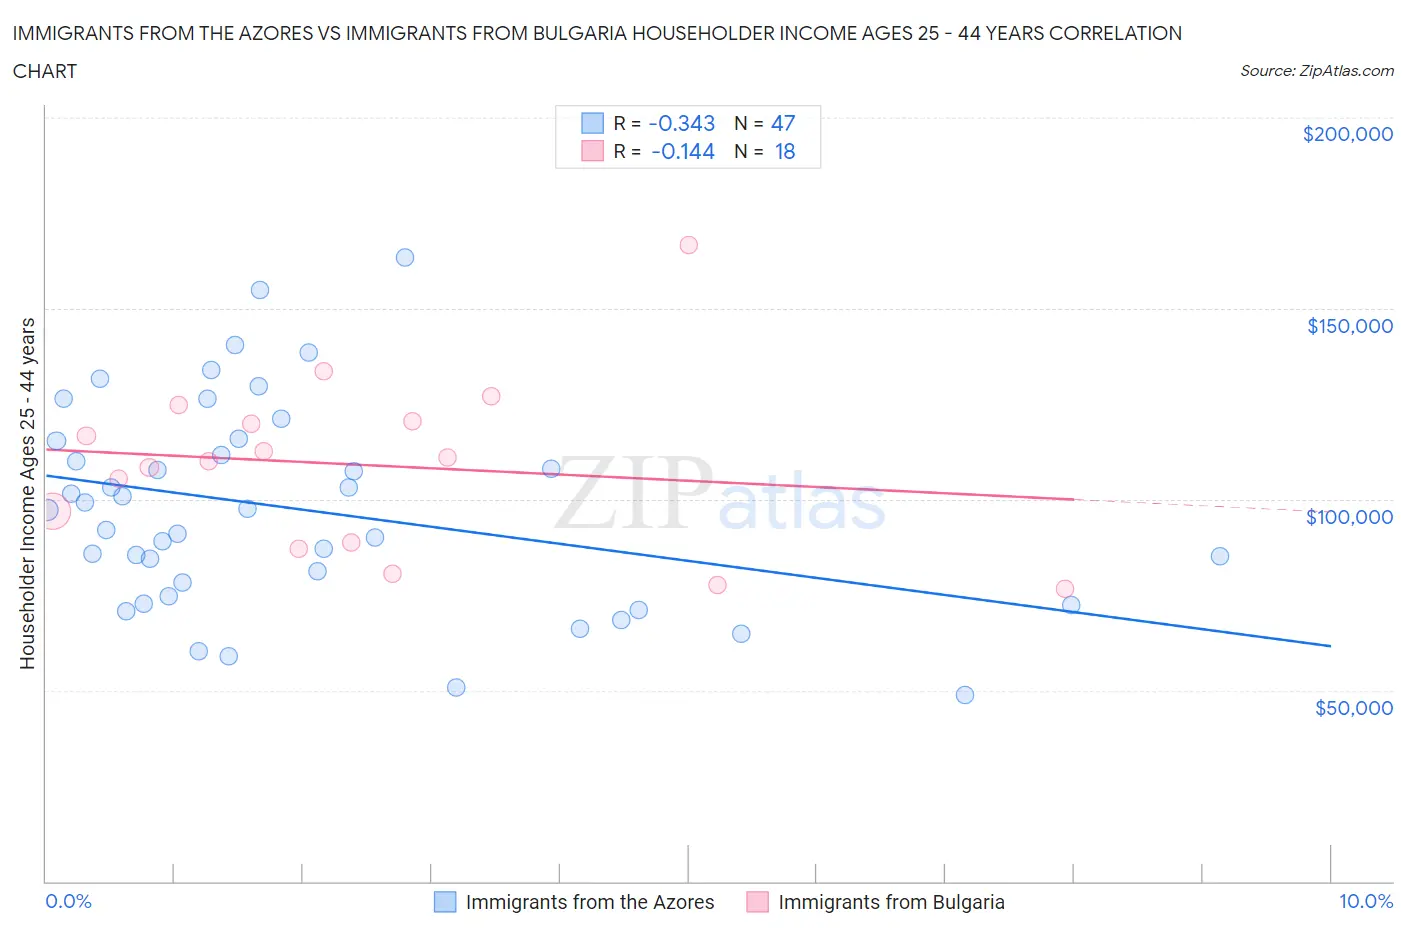 Immigrants from the Azores vs Immigrants from Bulgaria Householder Income Ages 25 - 44 years